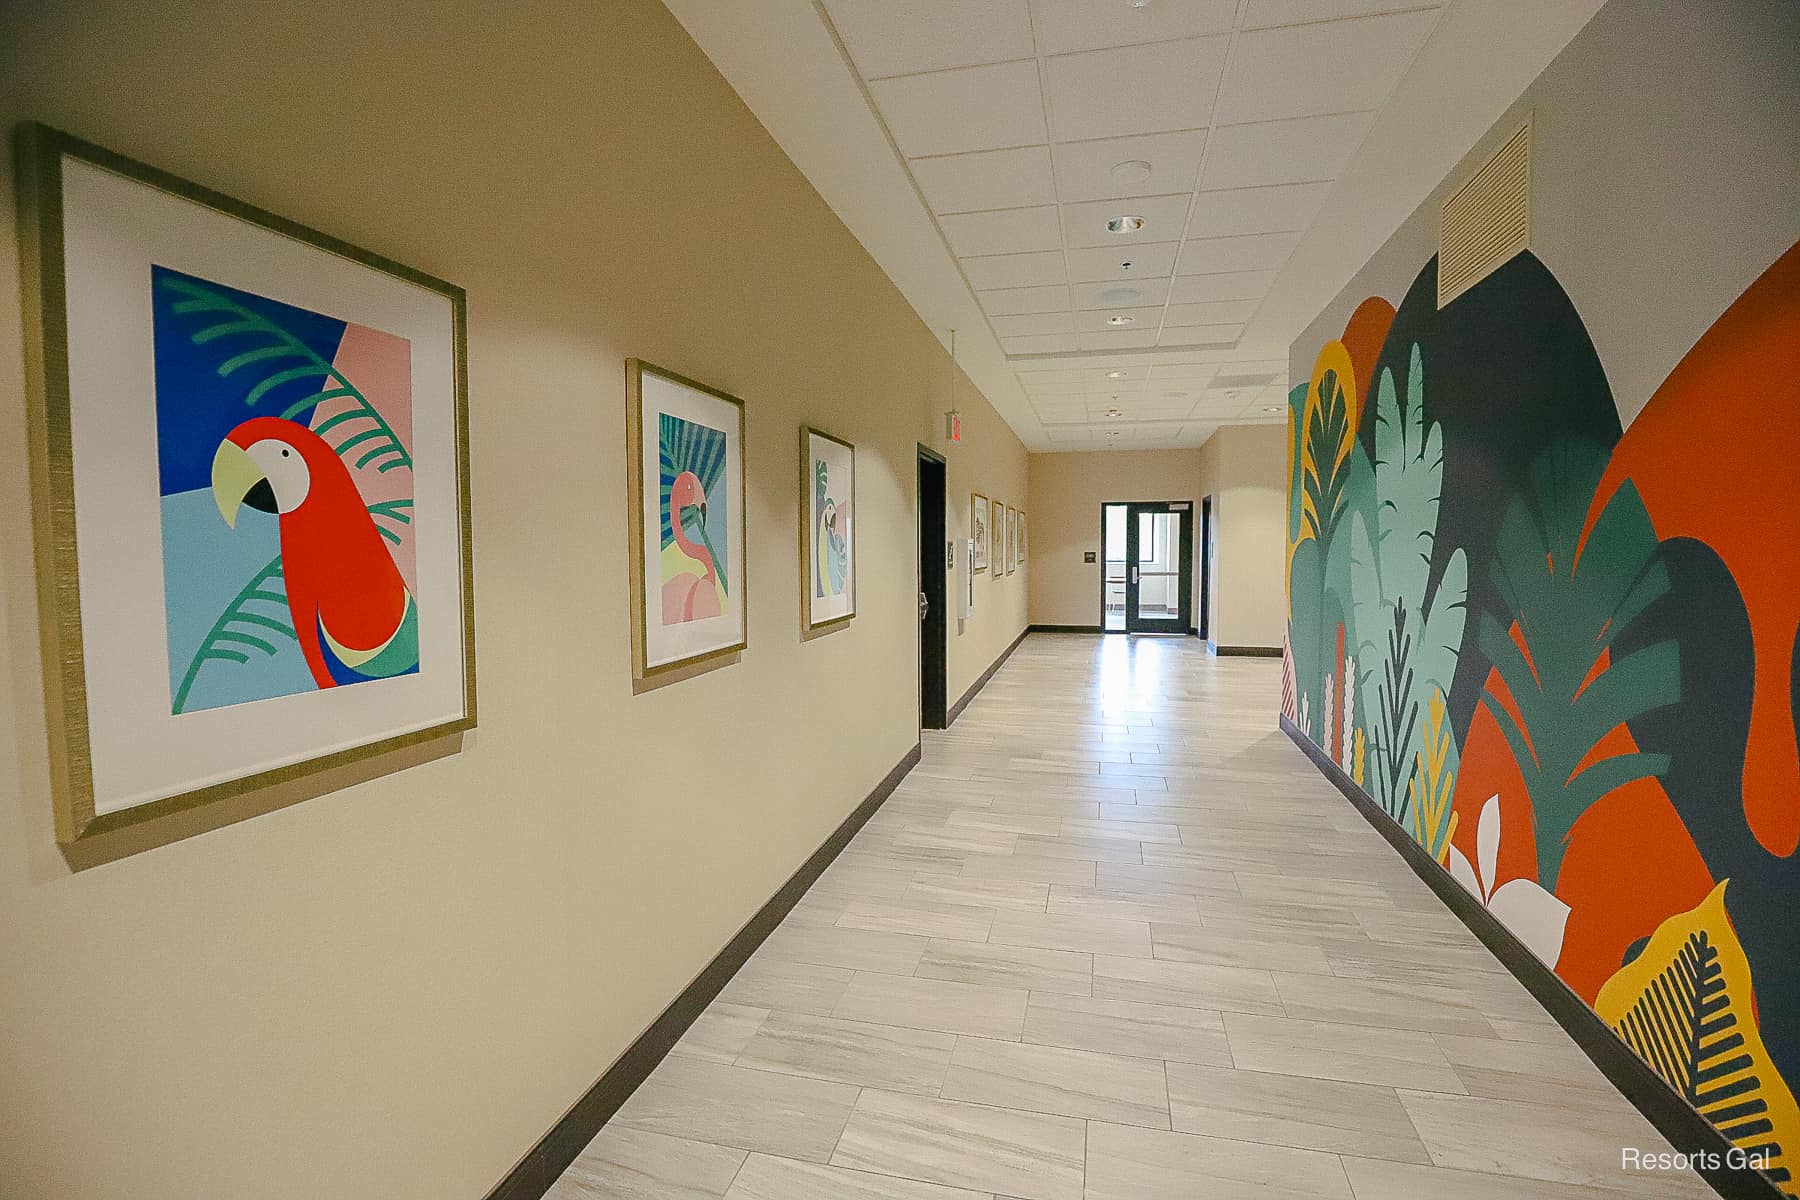 Hallway with bright, cheerful murals of tropical animals. 